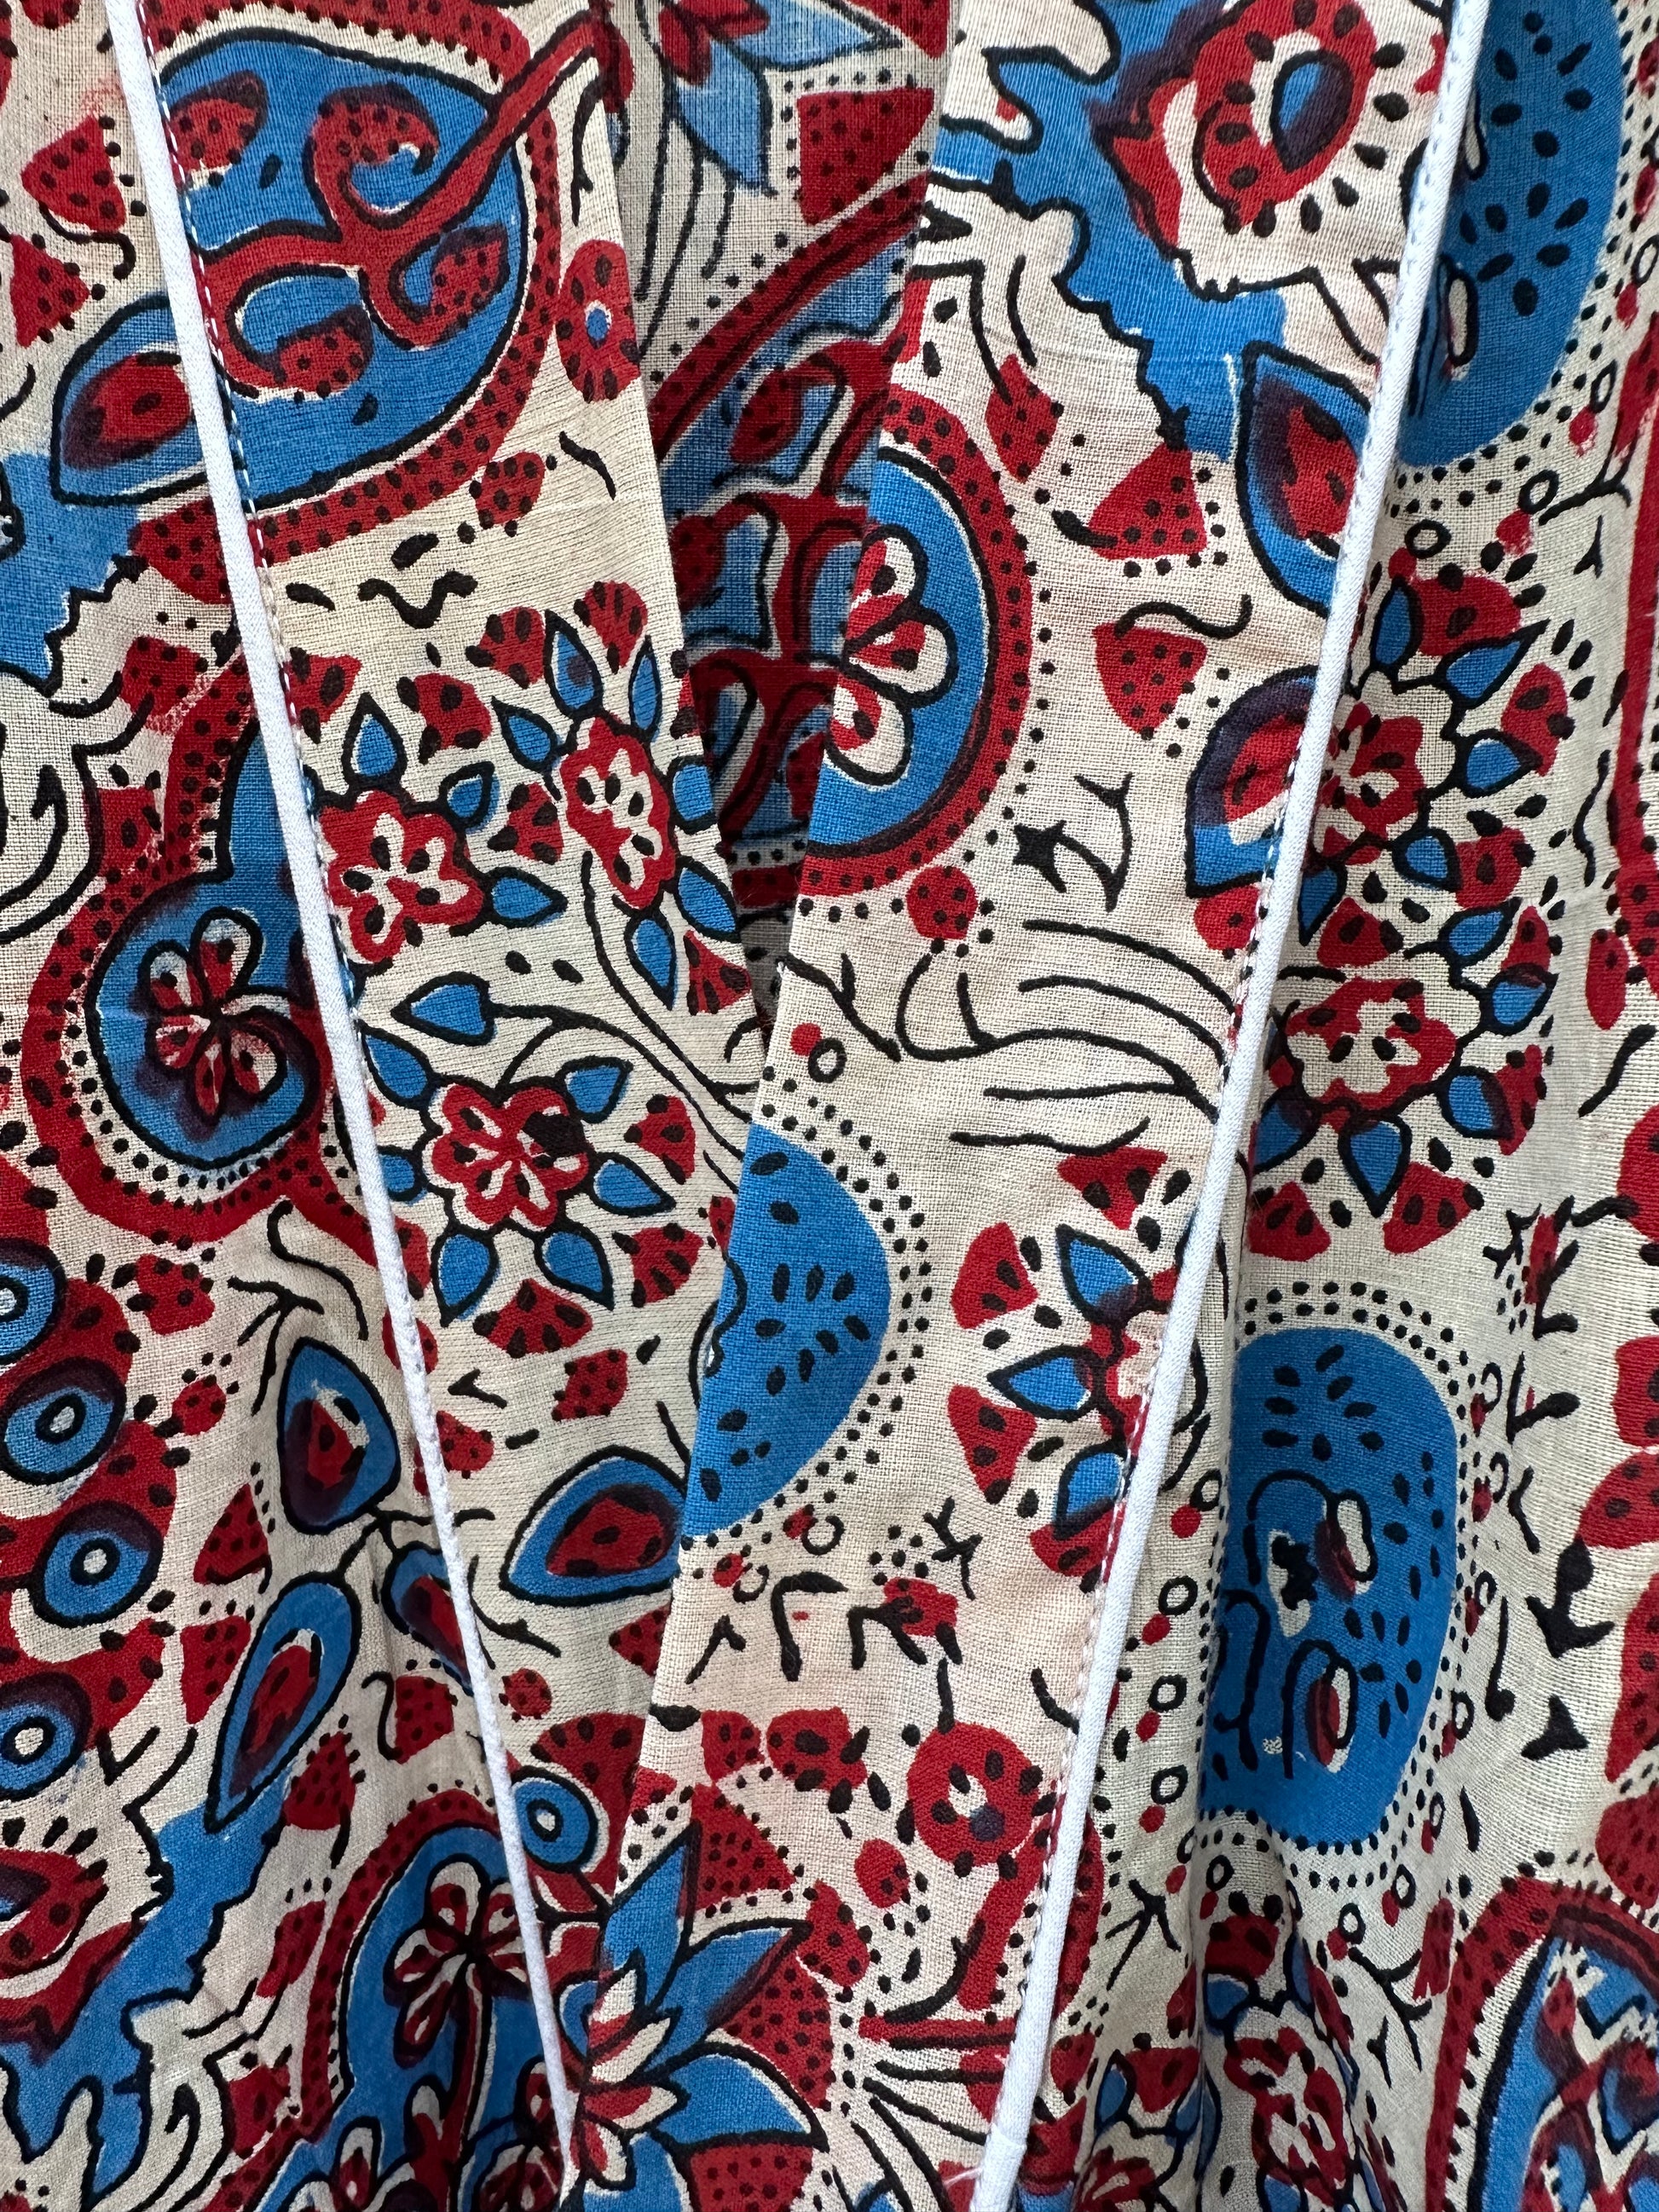 Hand-block Printed Kimono Robes in Red, Blue and Off-white - DharBazaar